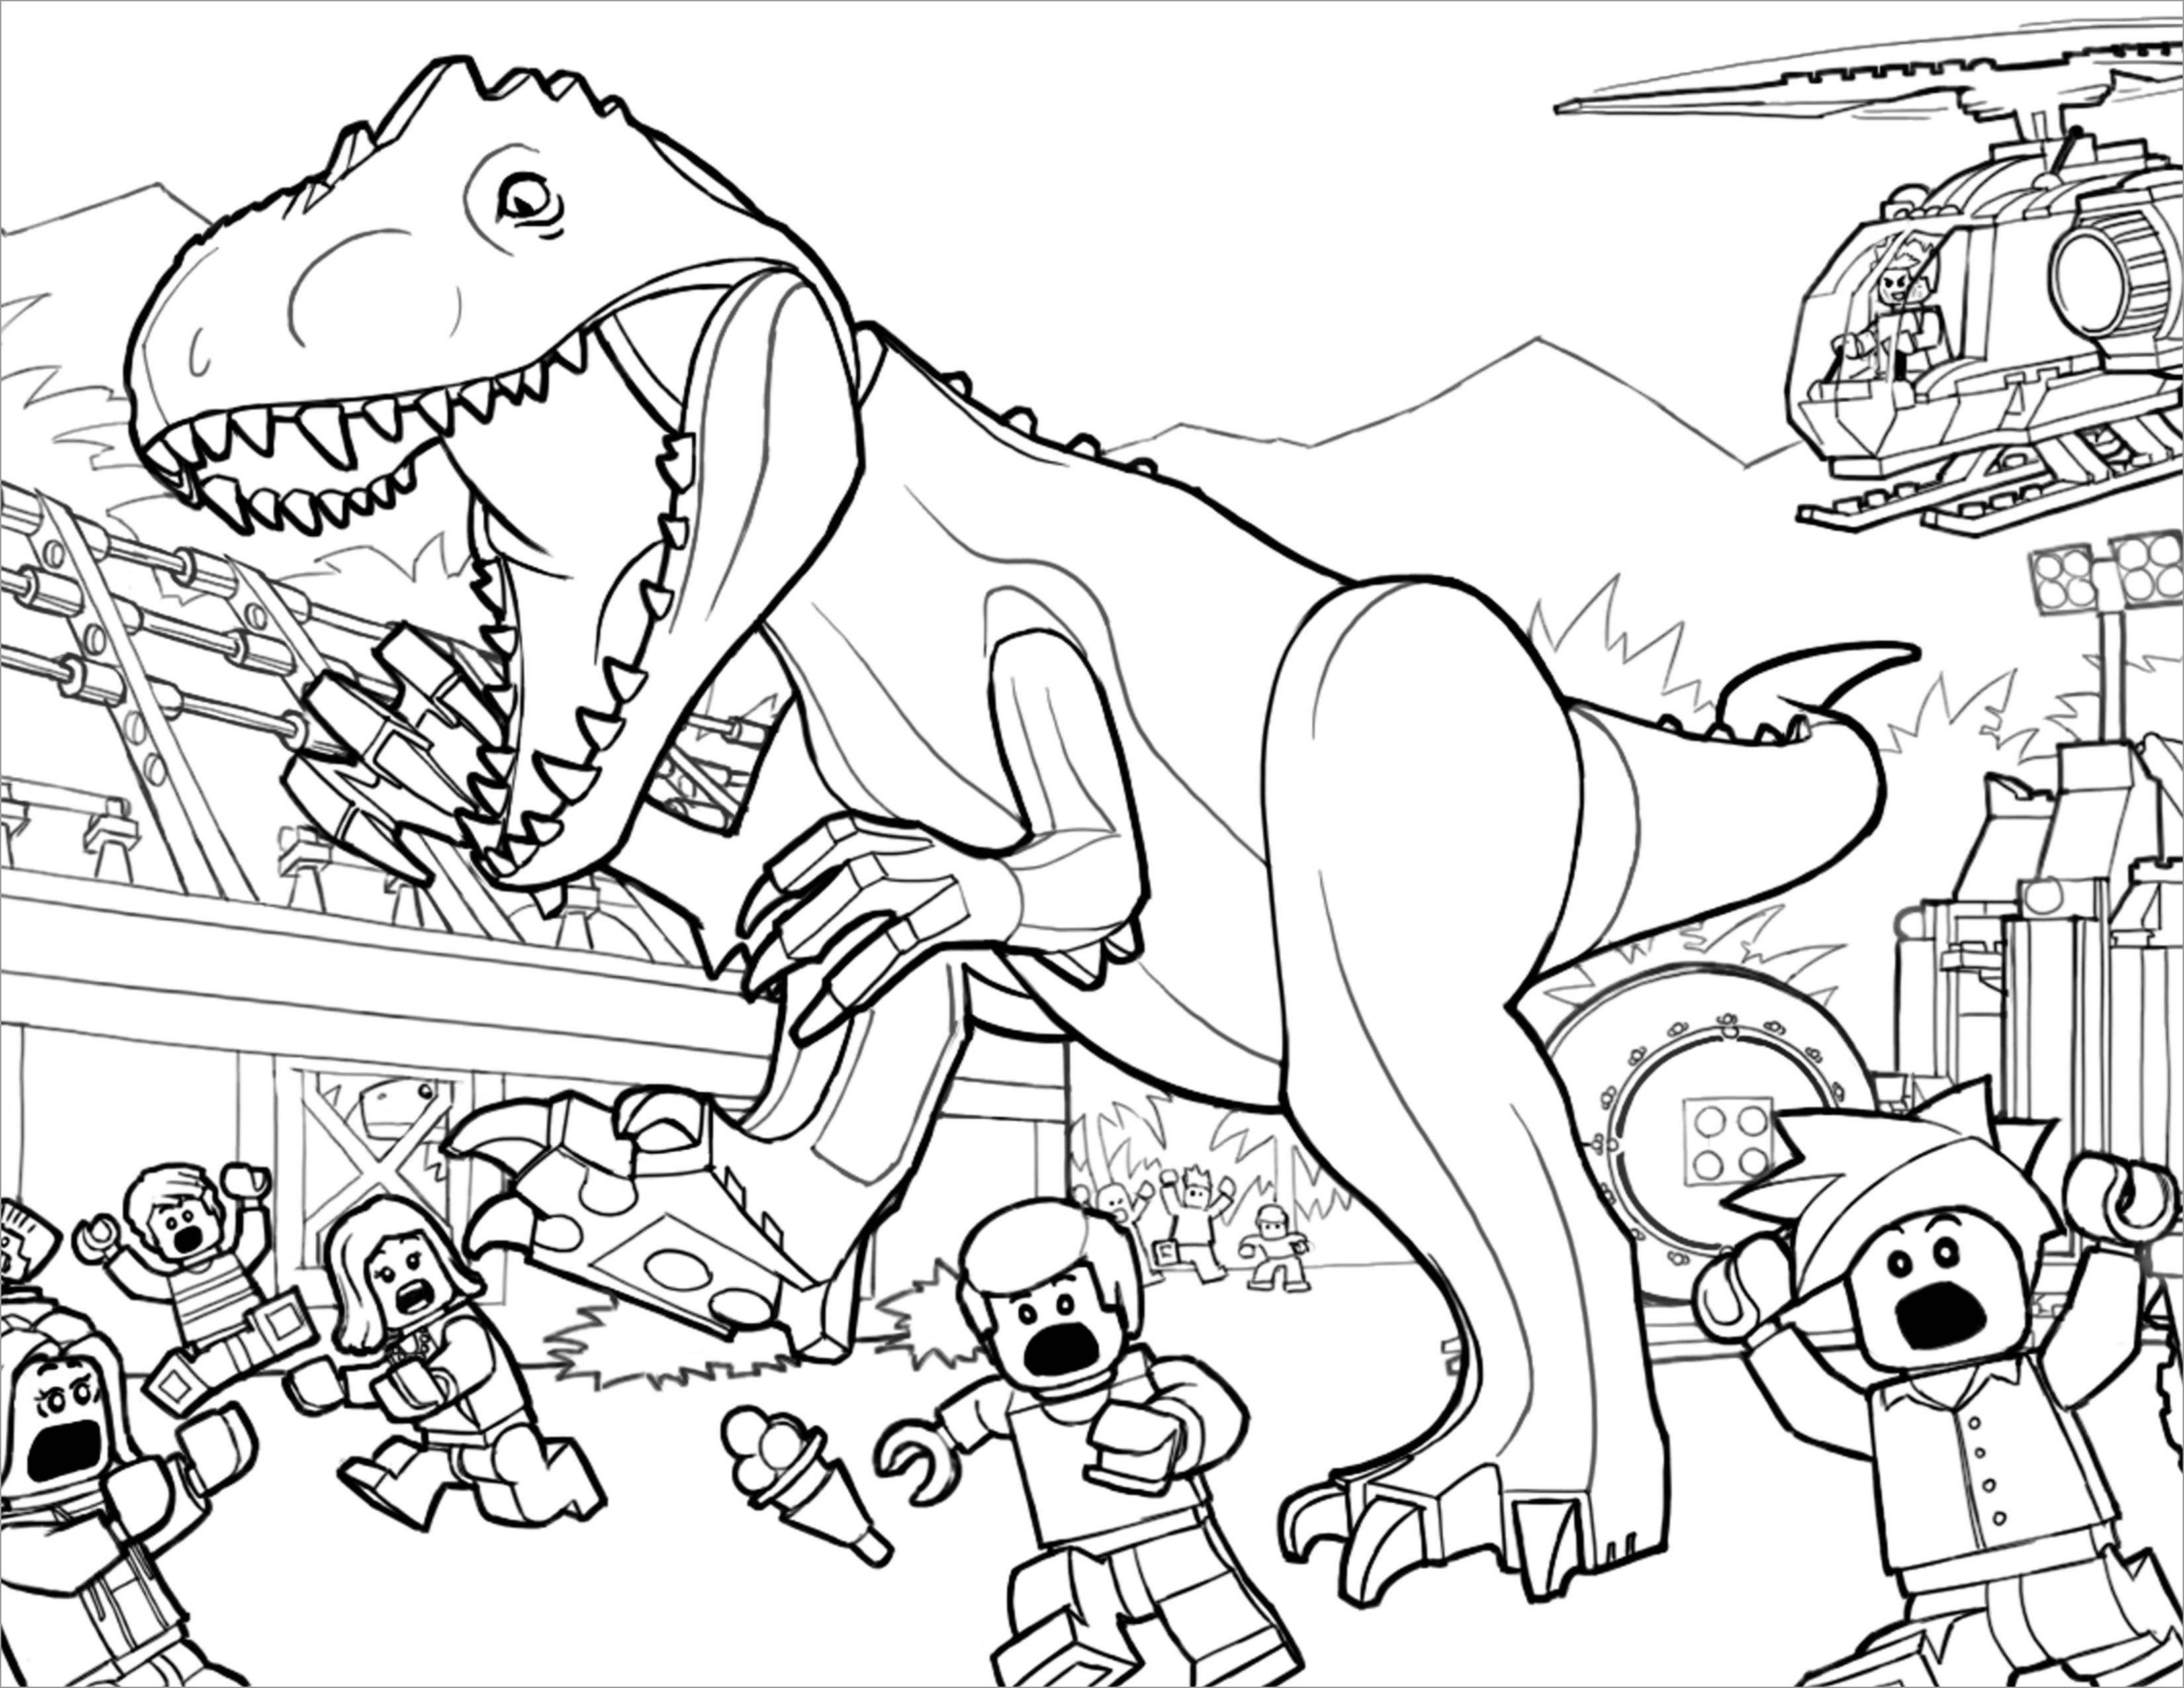 Jurassic Park Lego Coloring Pages   ColoringBay